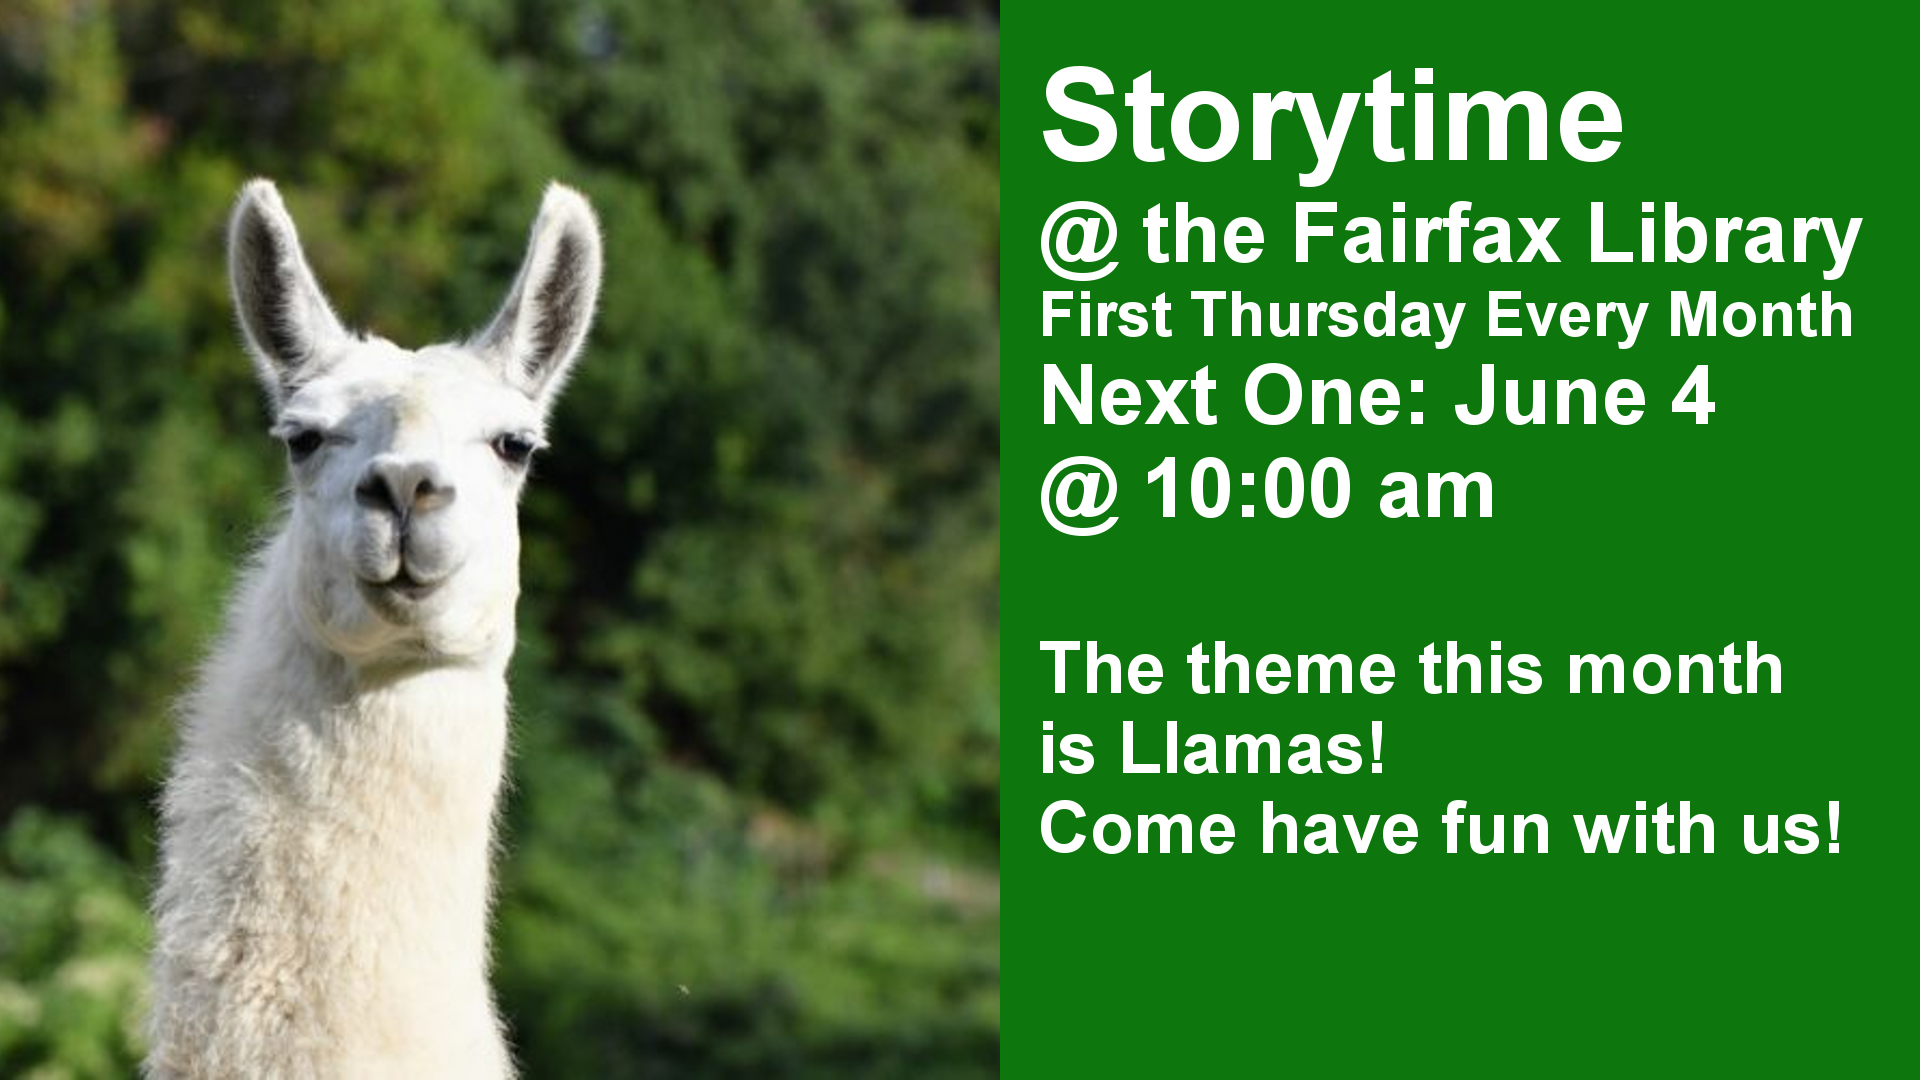 Storytime @ the Fairfax Library First Thursday Every Month Next One: June 4 @ 10:00 am  The theme this month is Llamas! Come have fun with us!